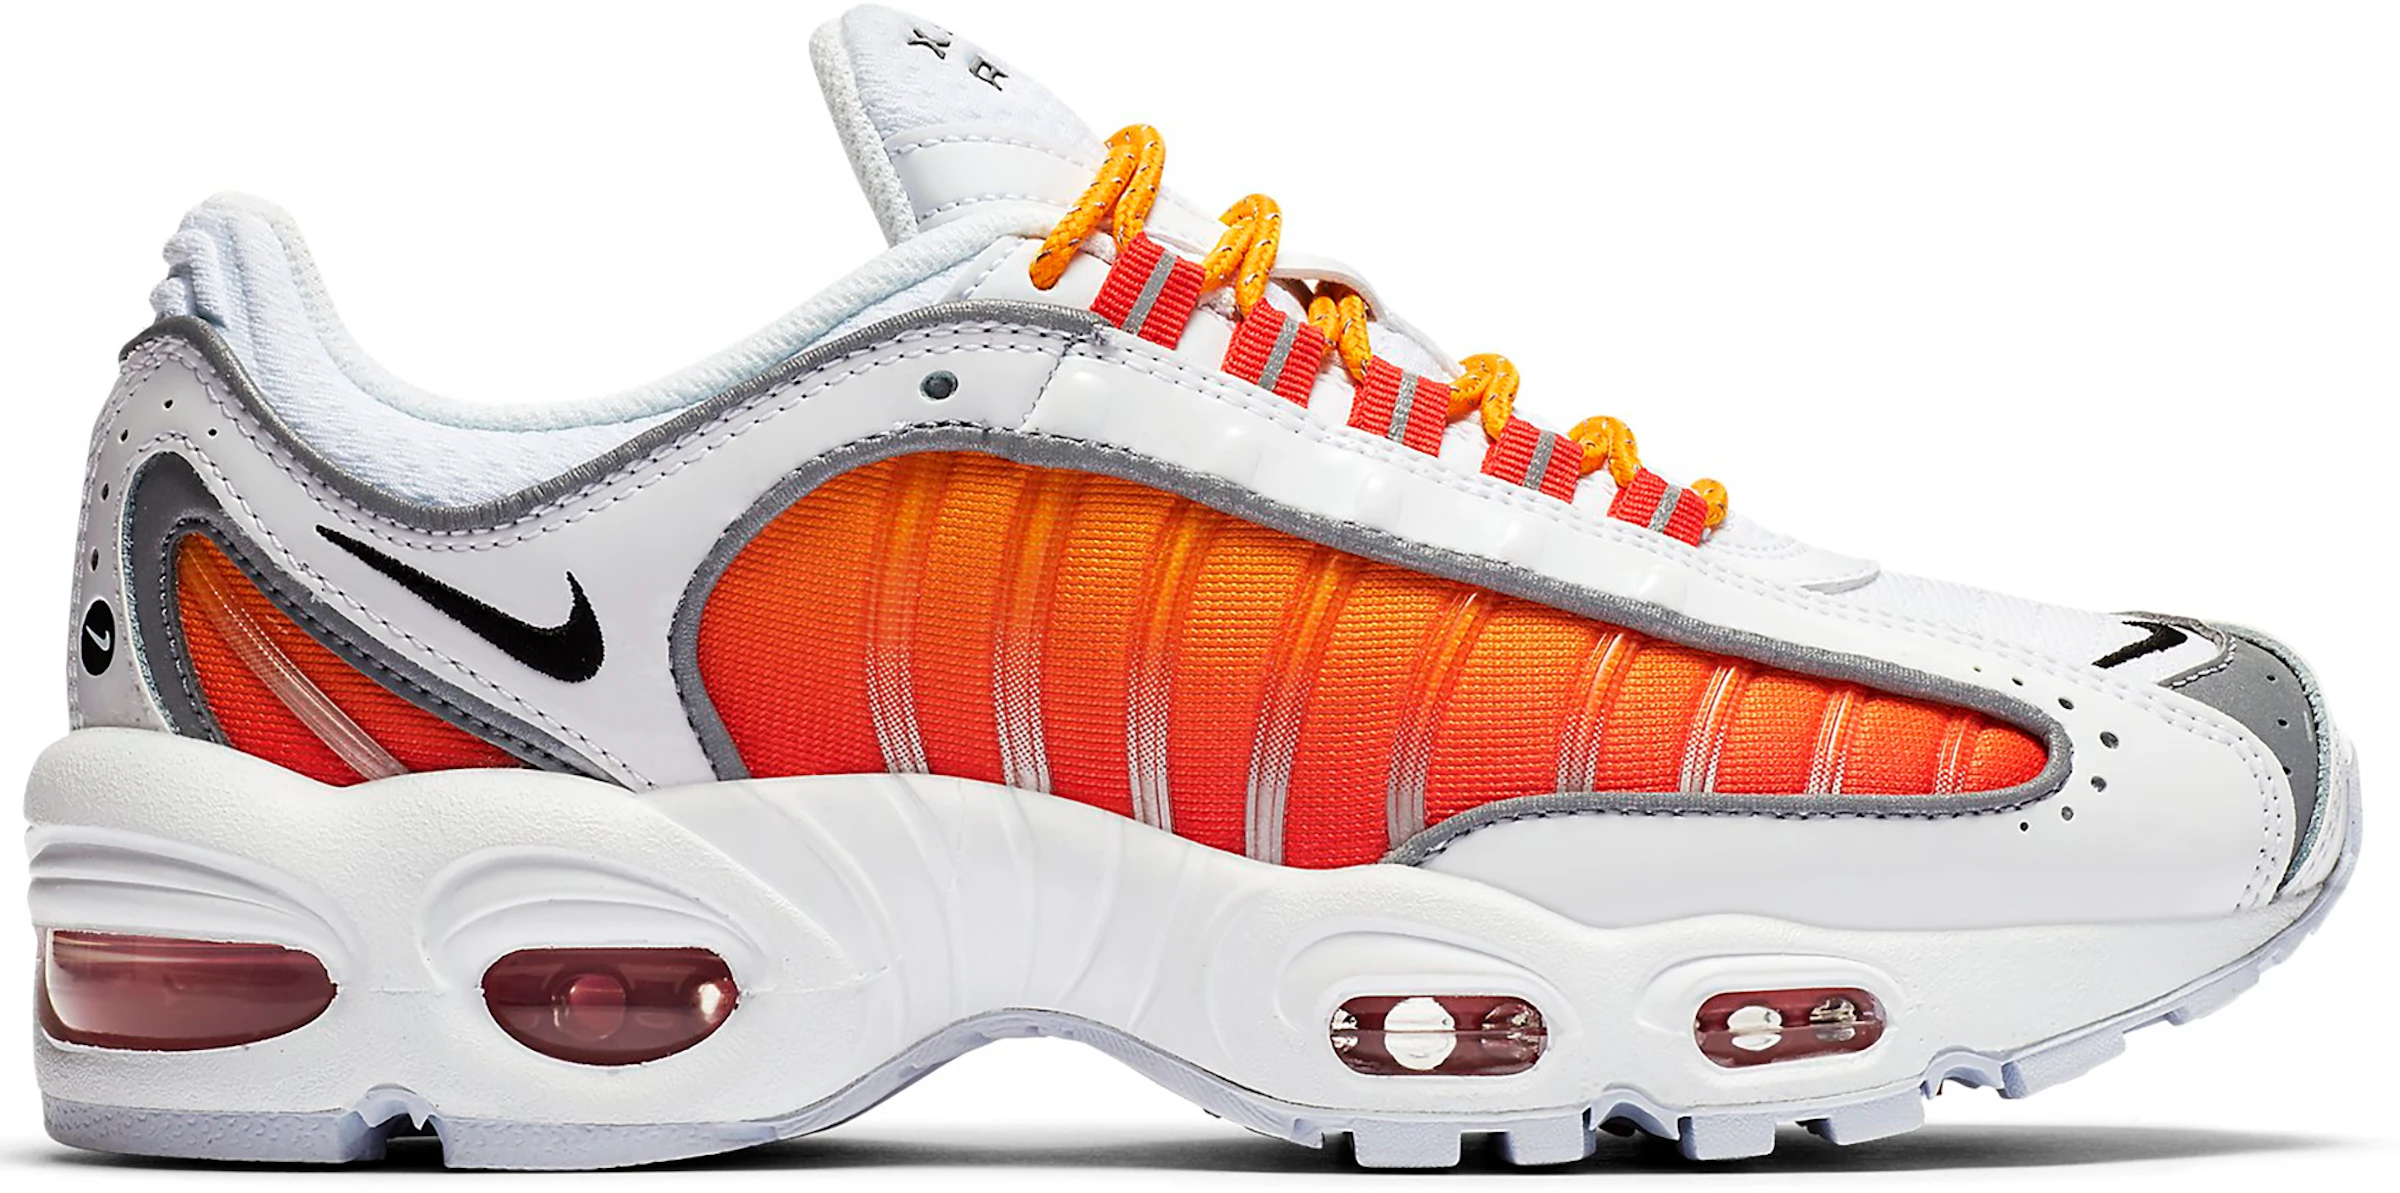 Fiordo Th Accesible Nike Air Max Tailwind 4 White University Gold Habanero Red (W) - CK4122-100  - ES